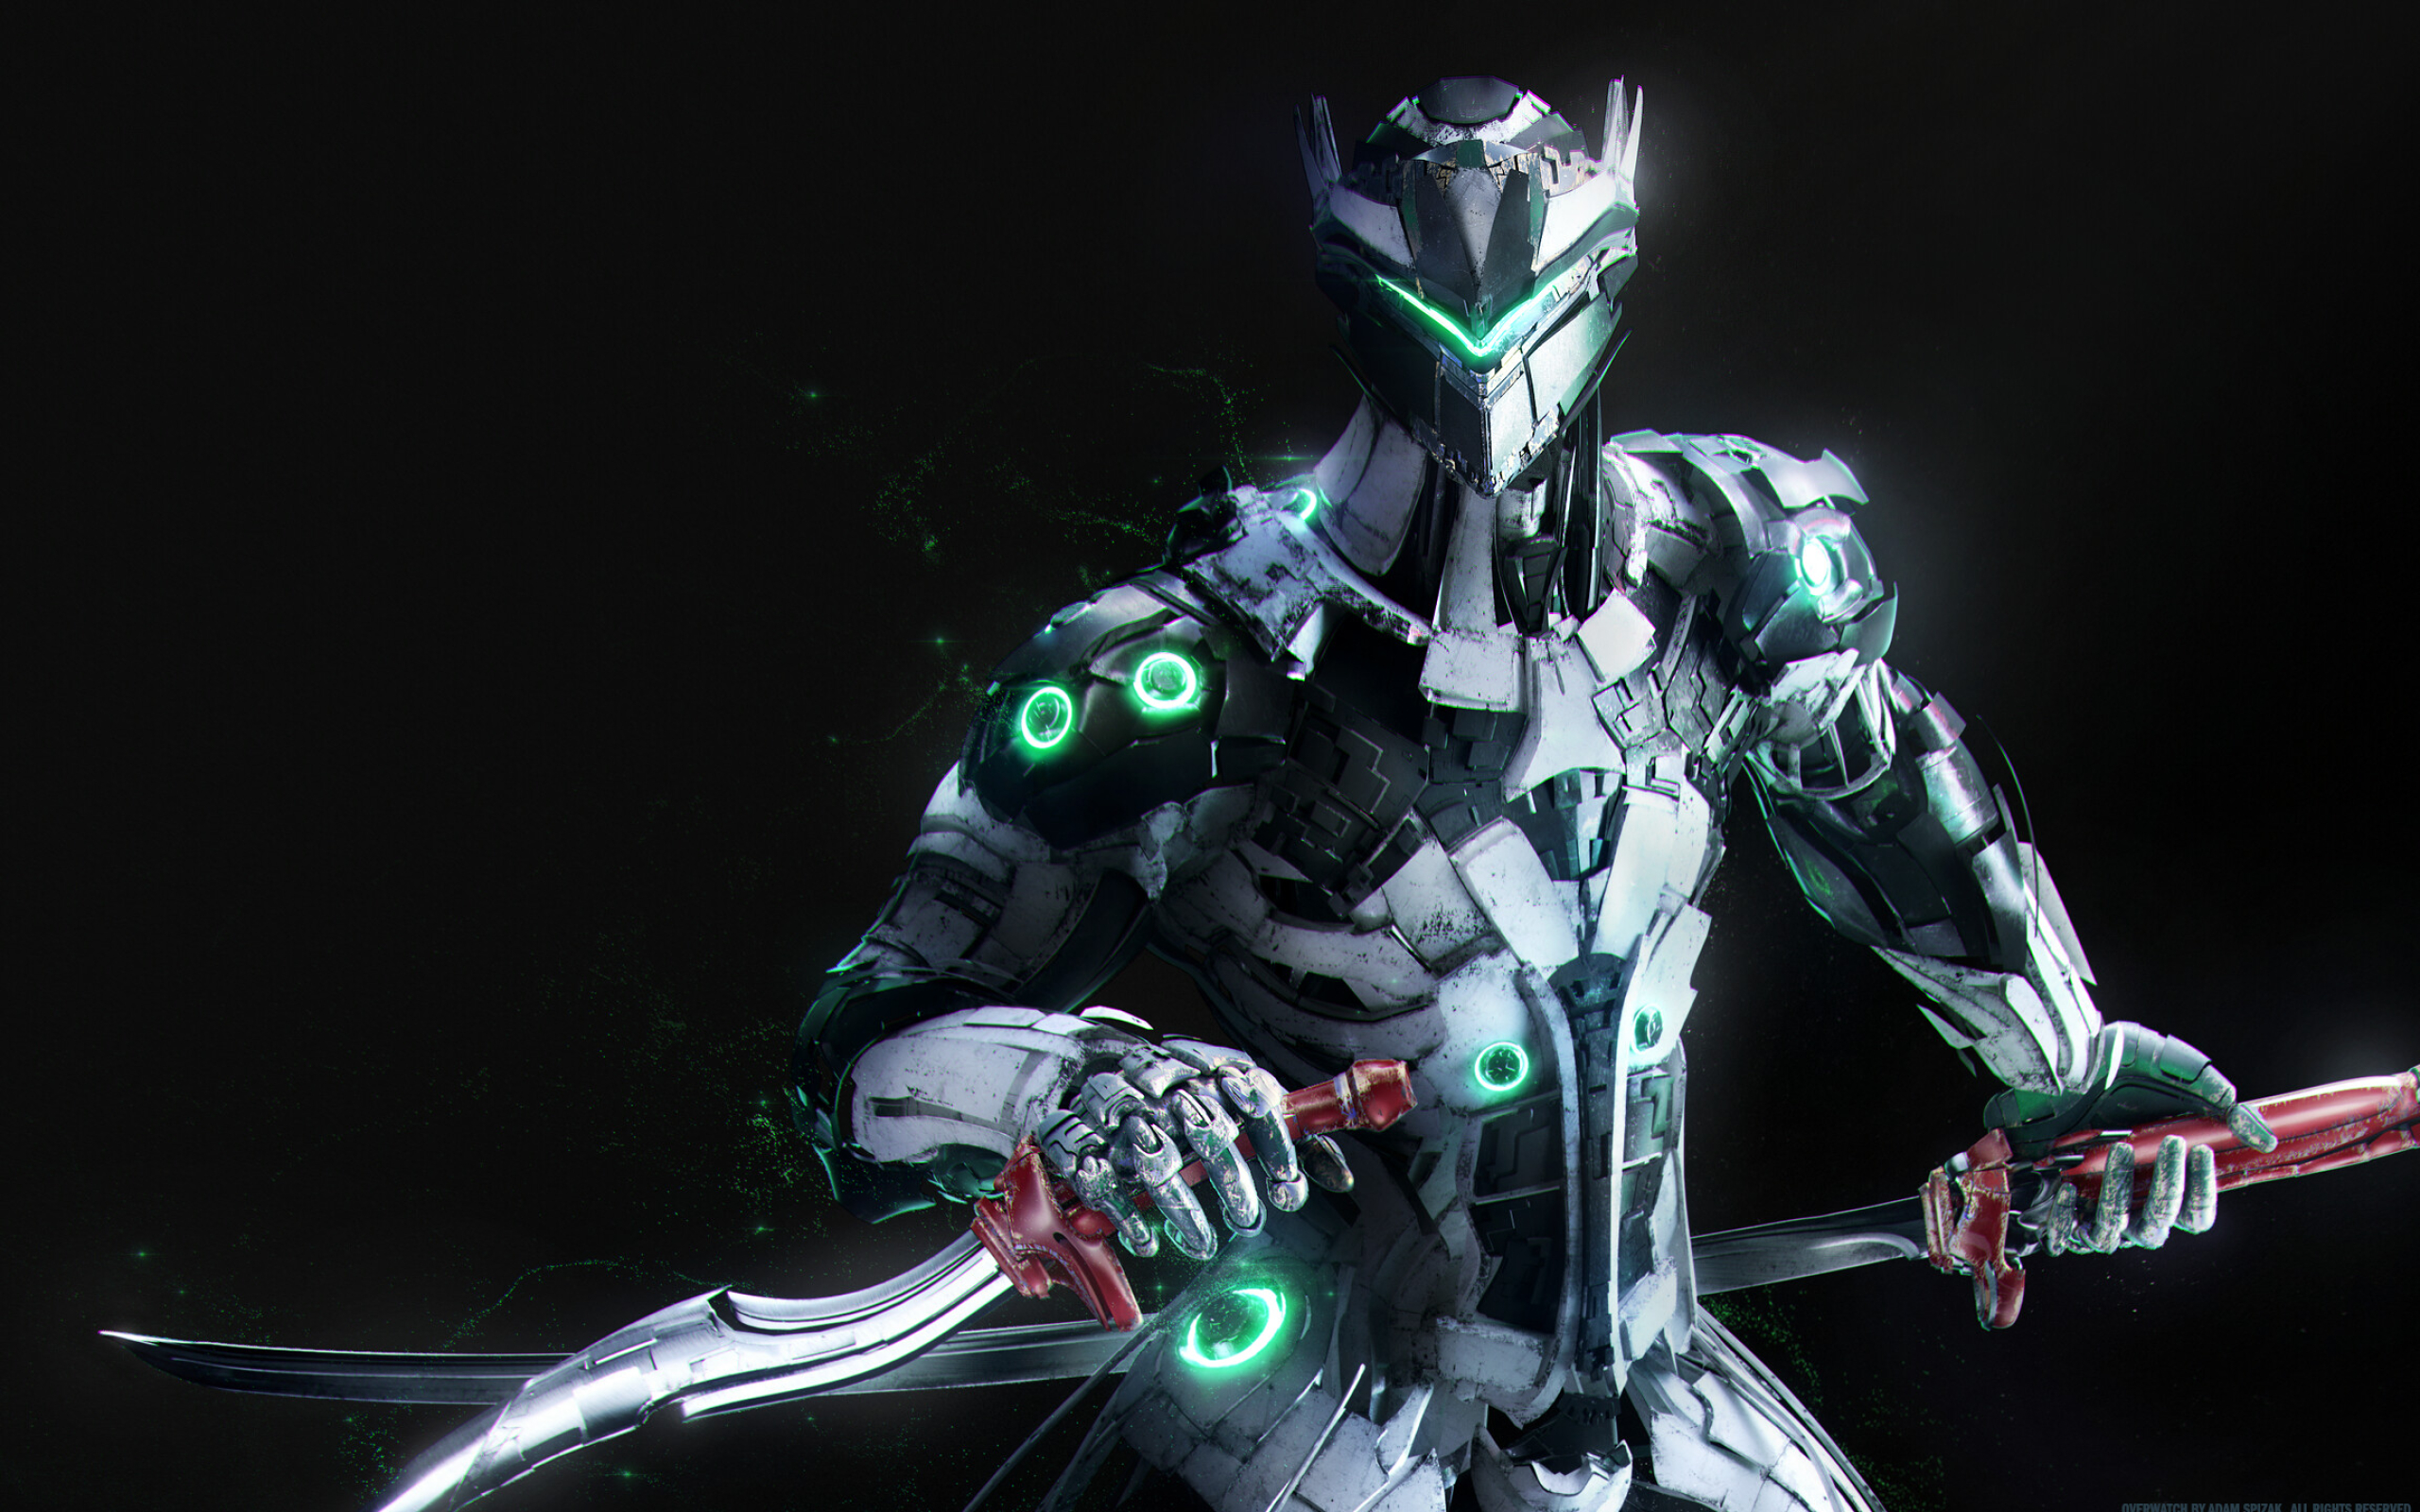 Genji: Overwatch, Video game characters, Dragonblade is a high risk, high reward Ultimate. 2560x1600 HD Wallpaper.